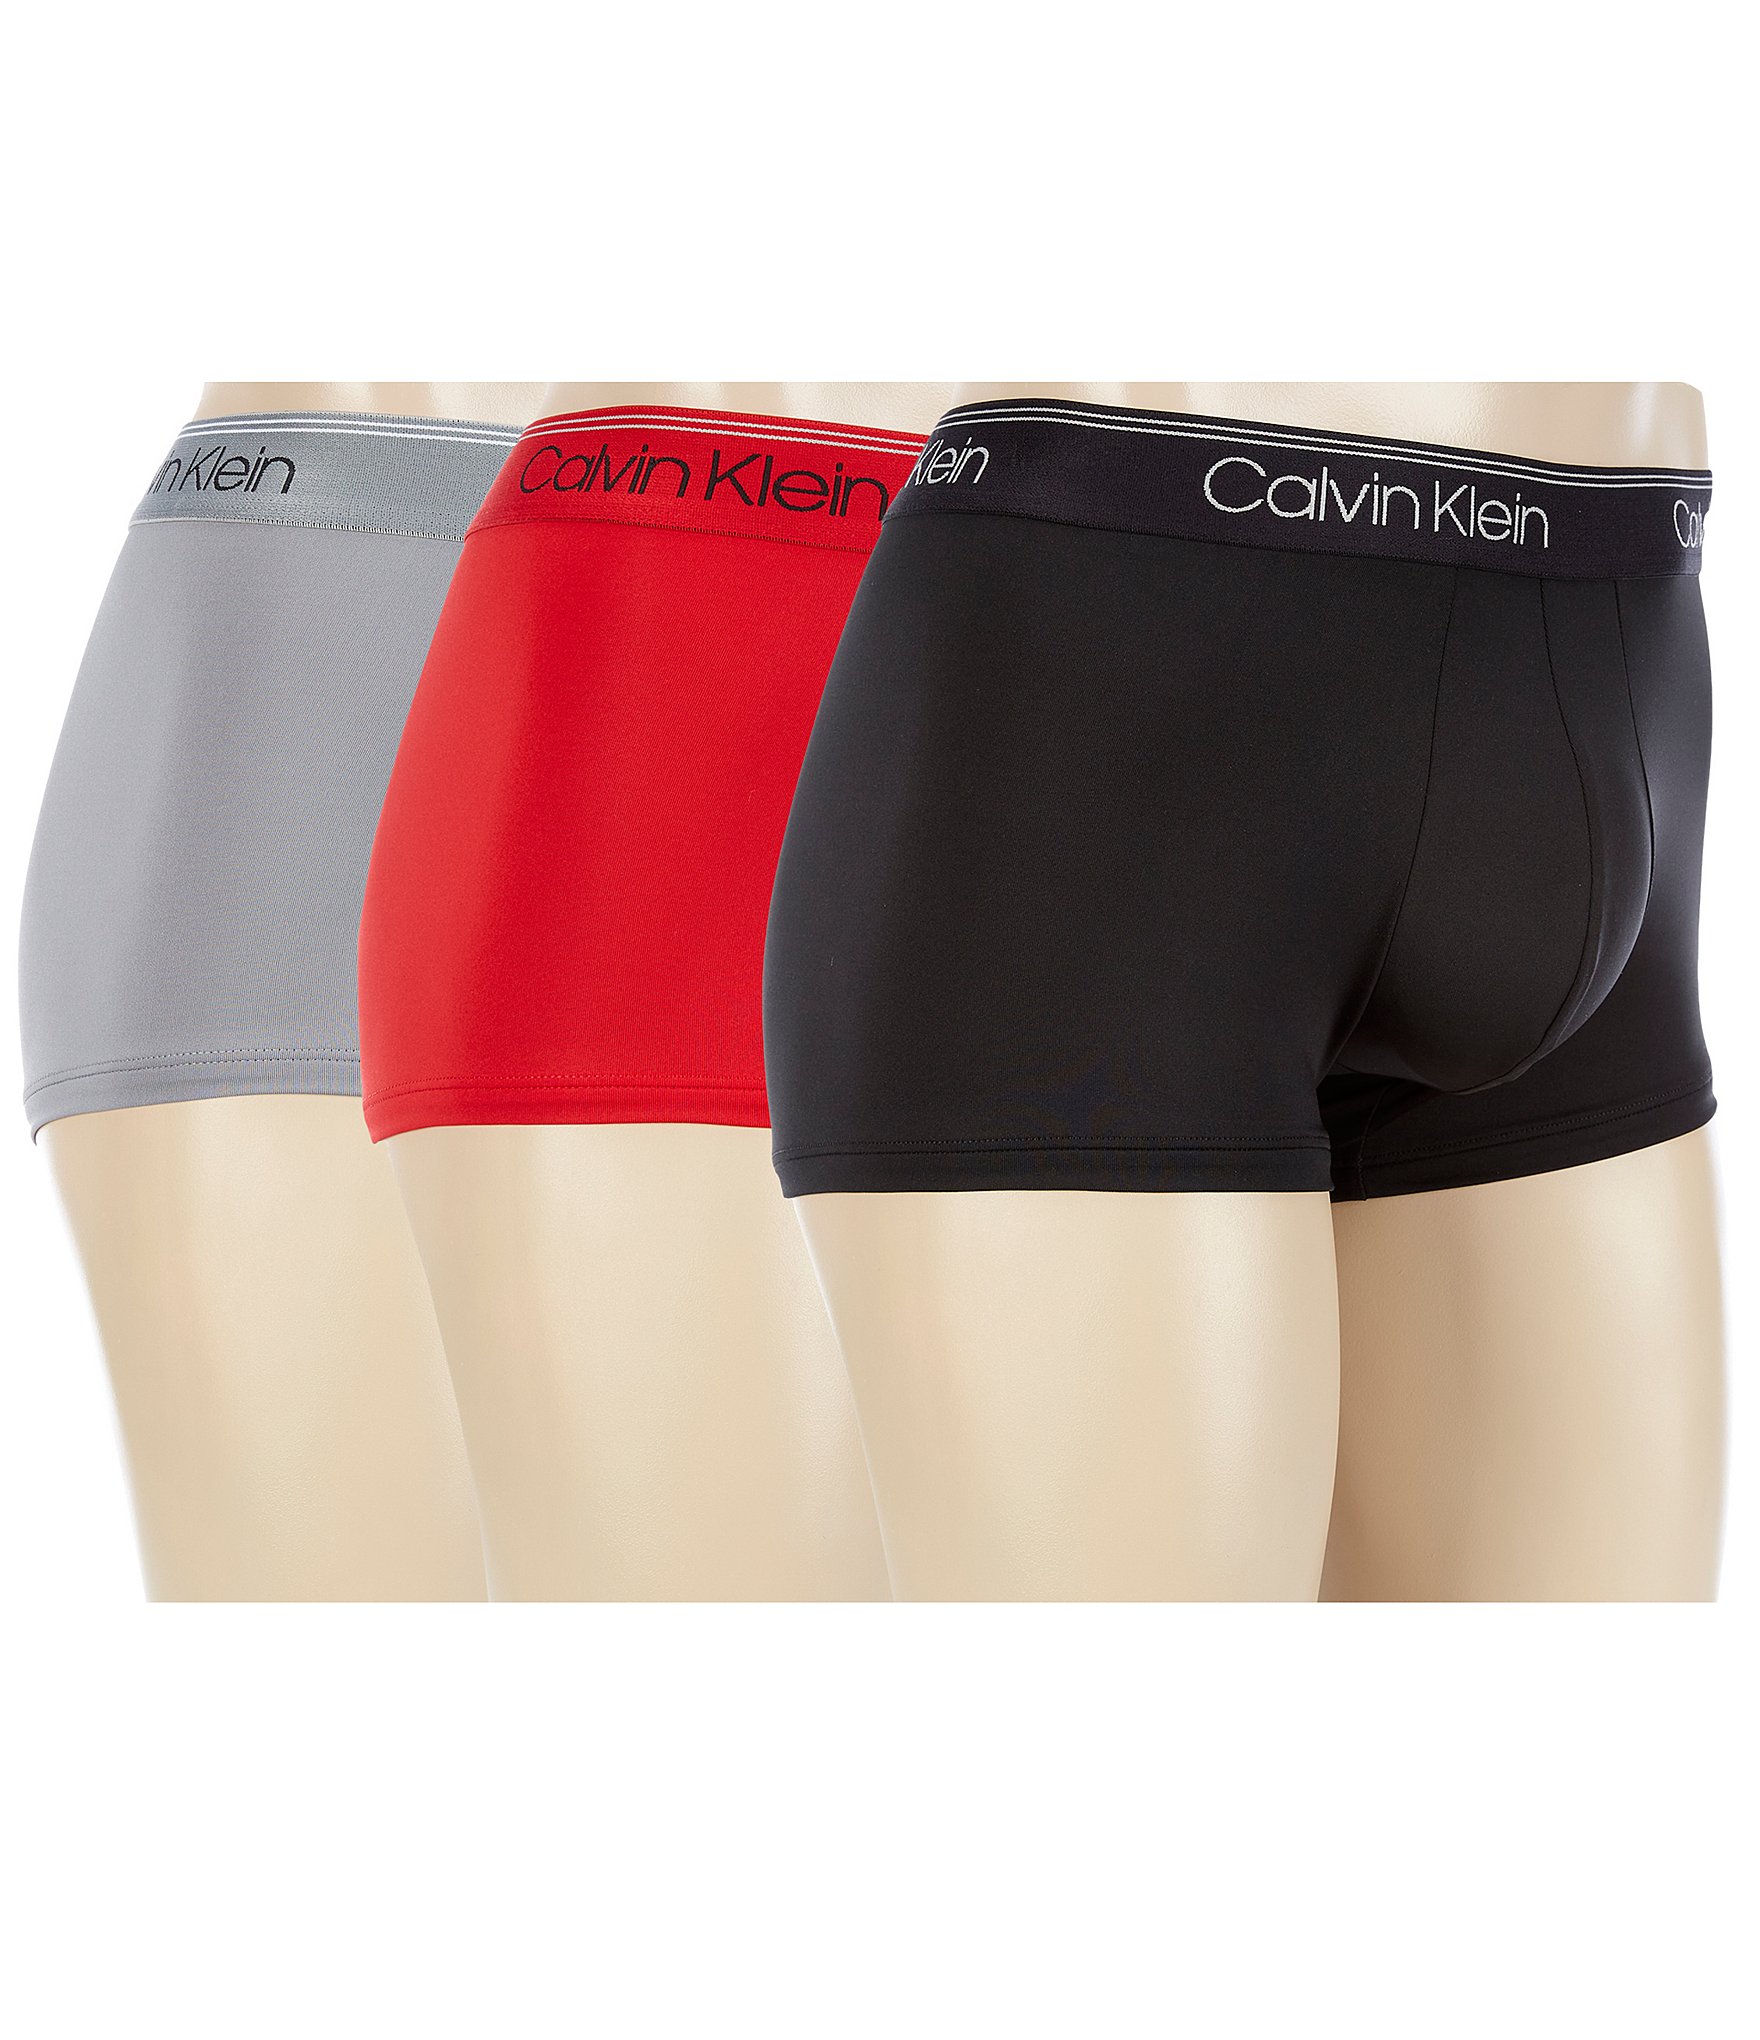 Murano Solid 3-Pack Cotton Low Rise Briefs 3-Pack